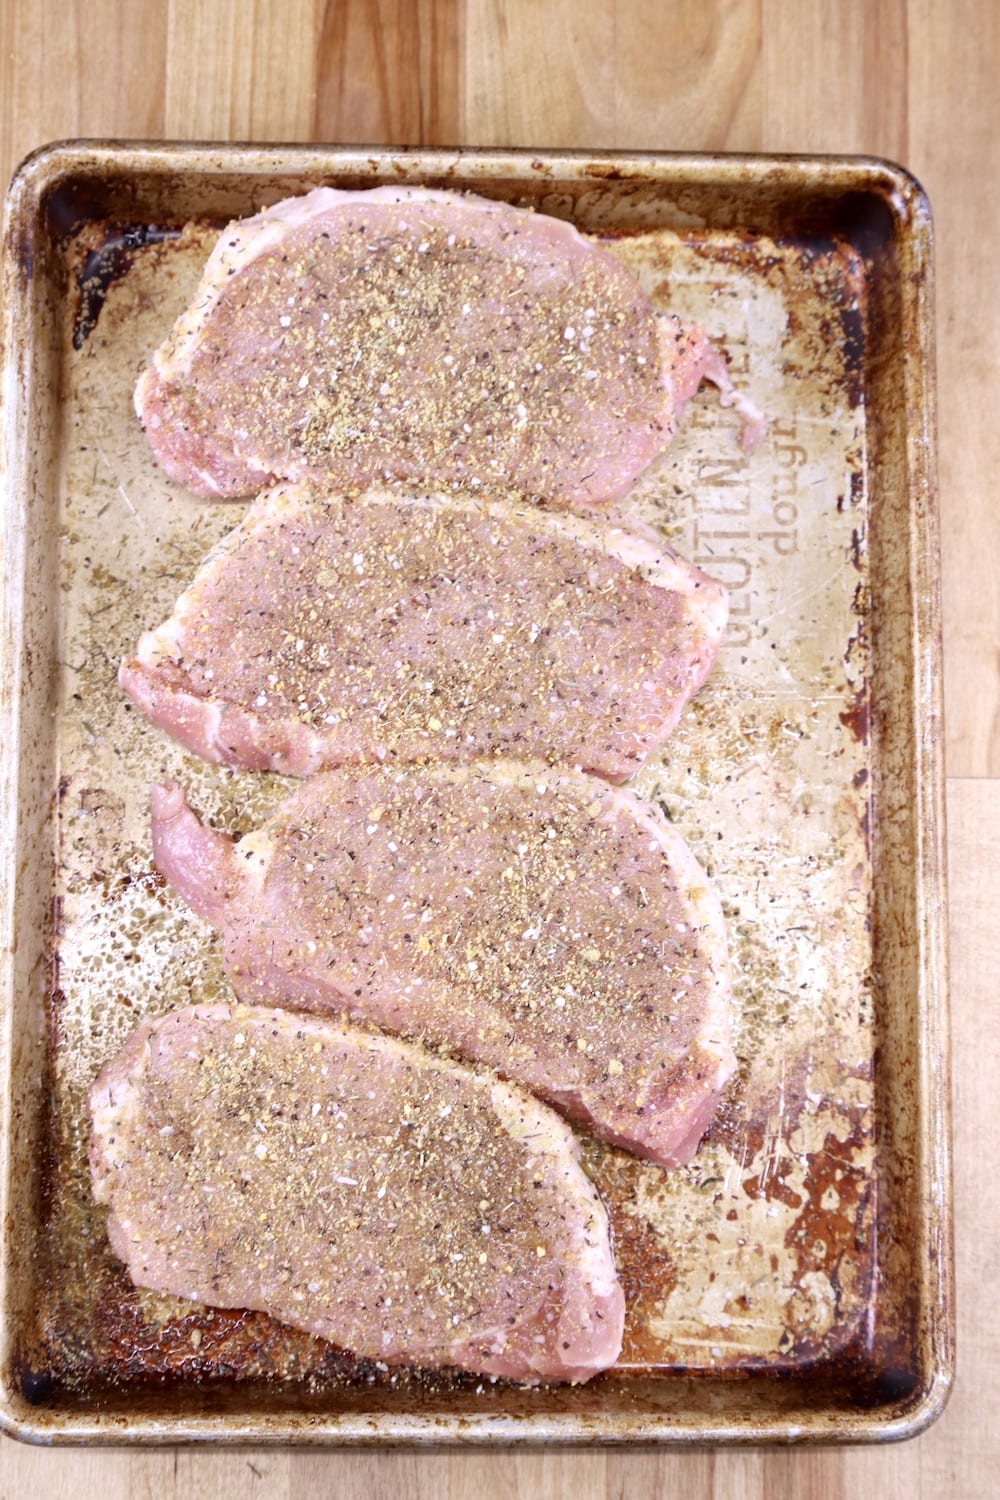 pork chops on a sheet pan with dry rub for grilling